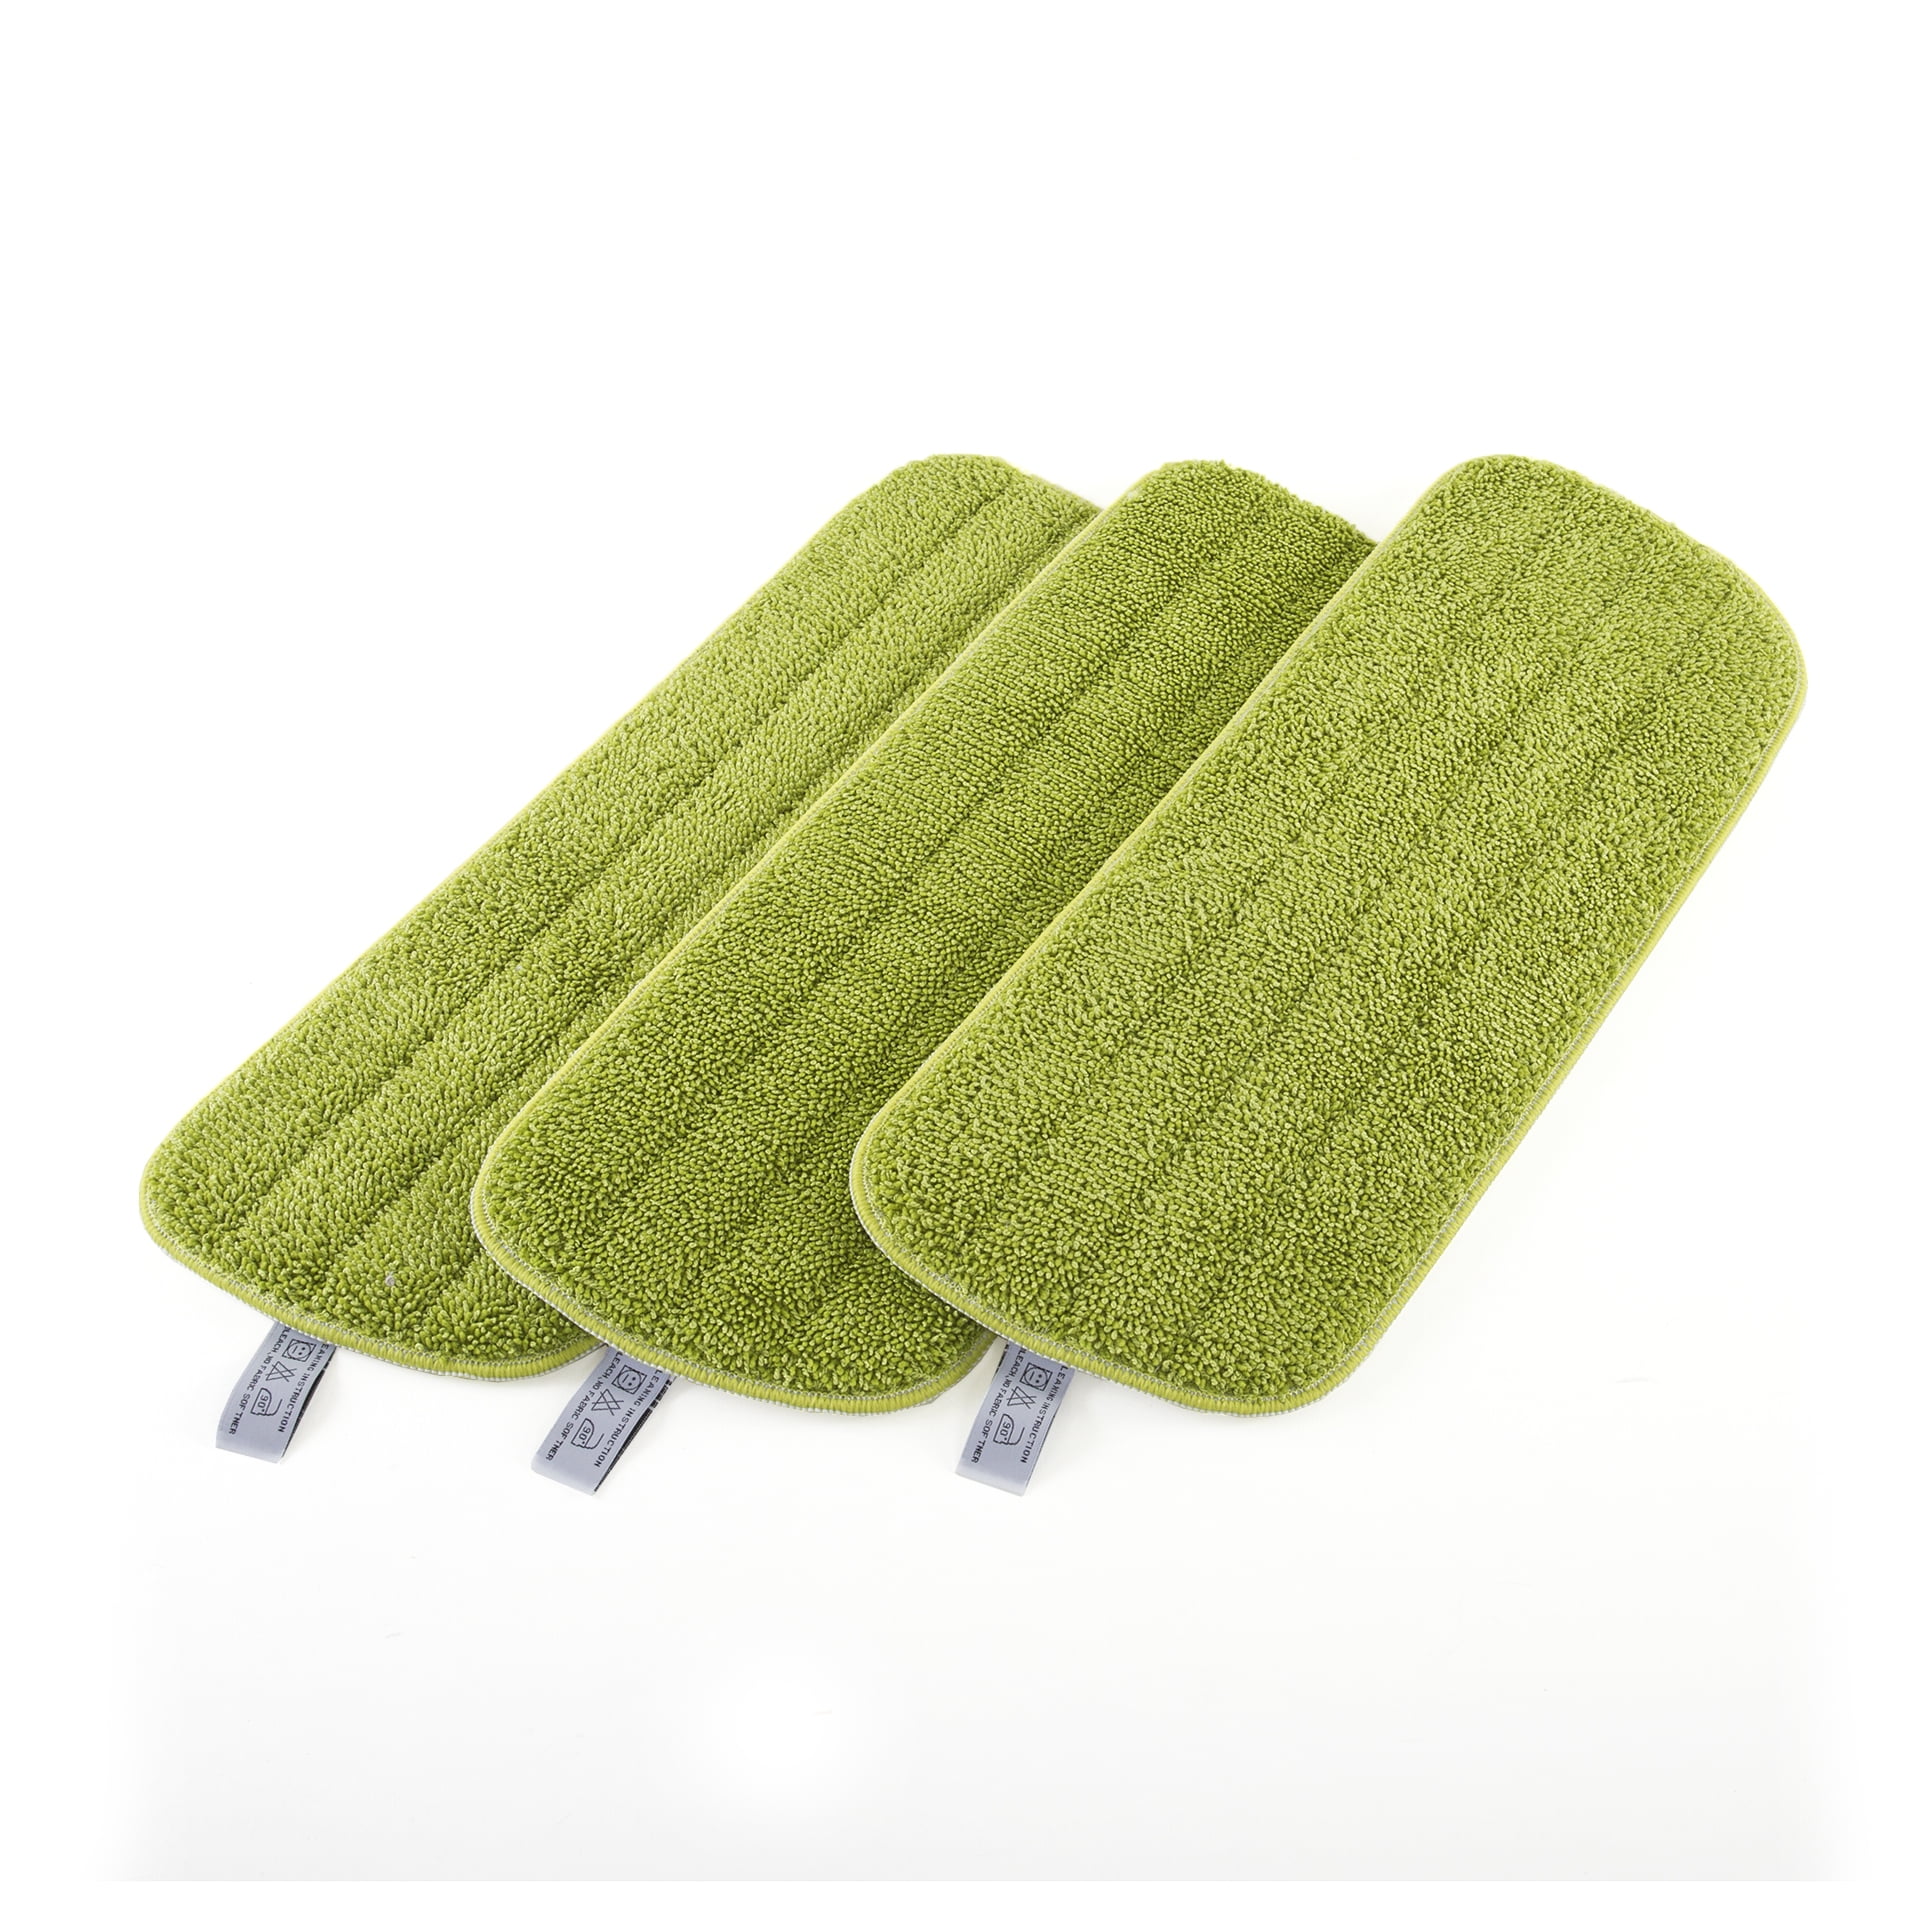 4 Pack Microfiber Spray Mop Pads Replacement Head for Wet Dry Dust Mop 